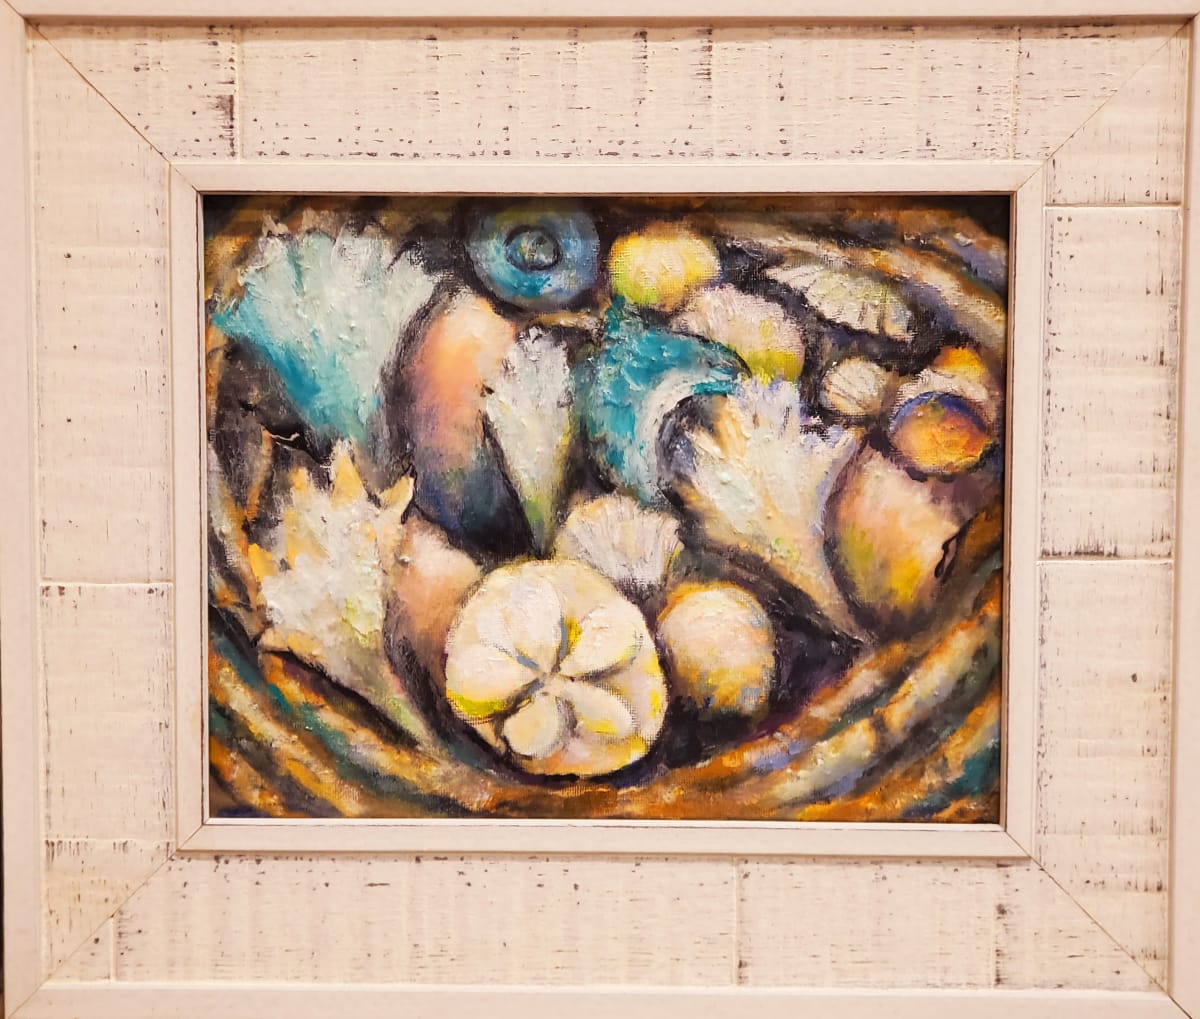 Shell Basket II (SOLD) by Susan Bryant  Image: This painting is a view of some of my mother's seashells in an old basket.